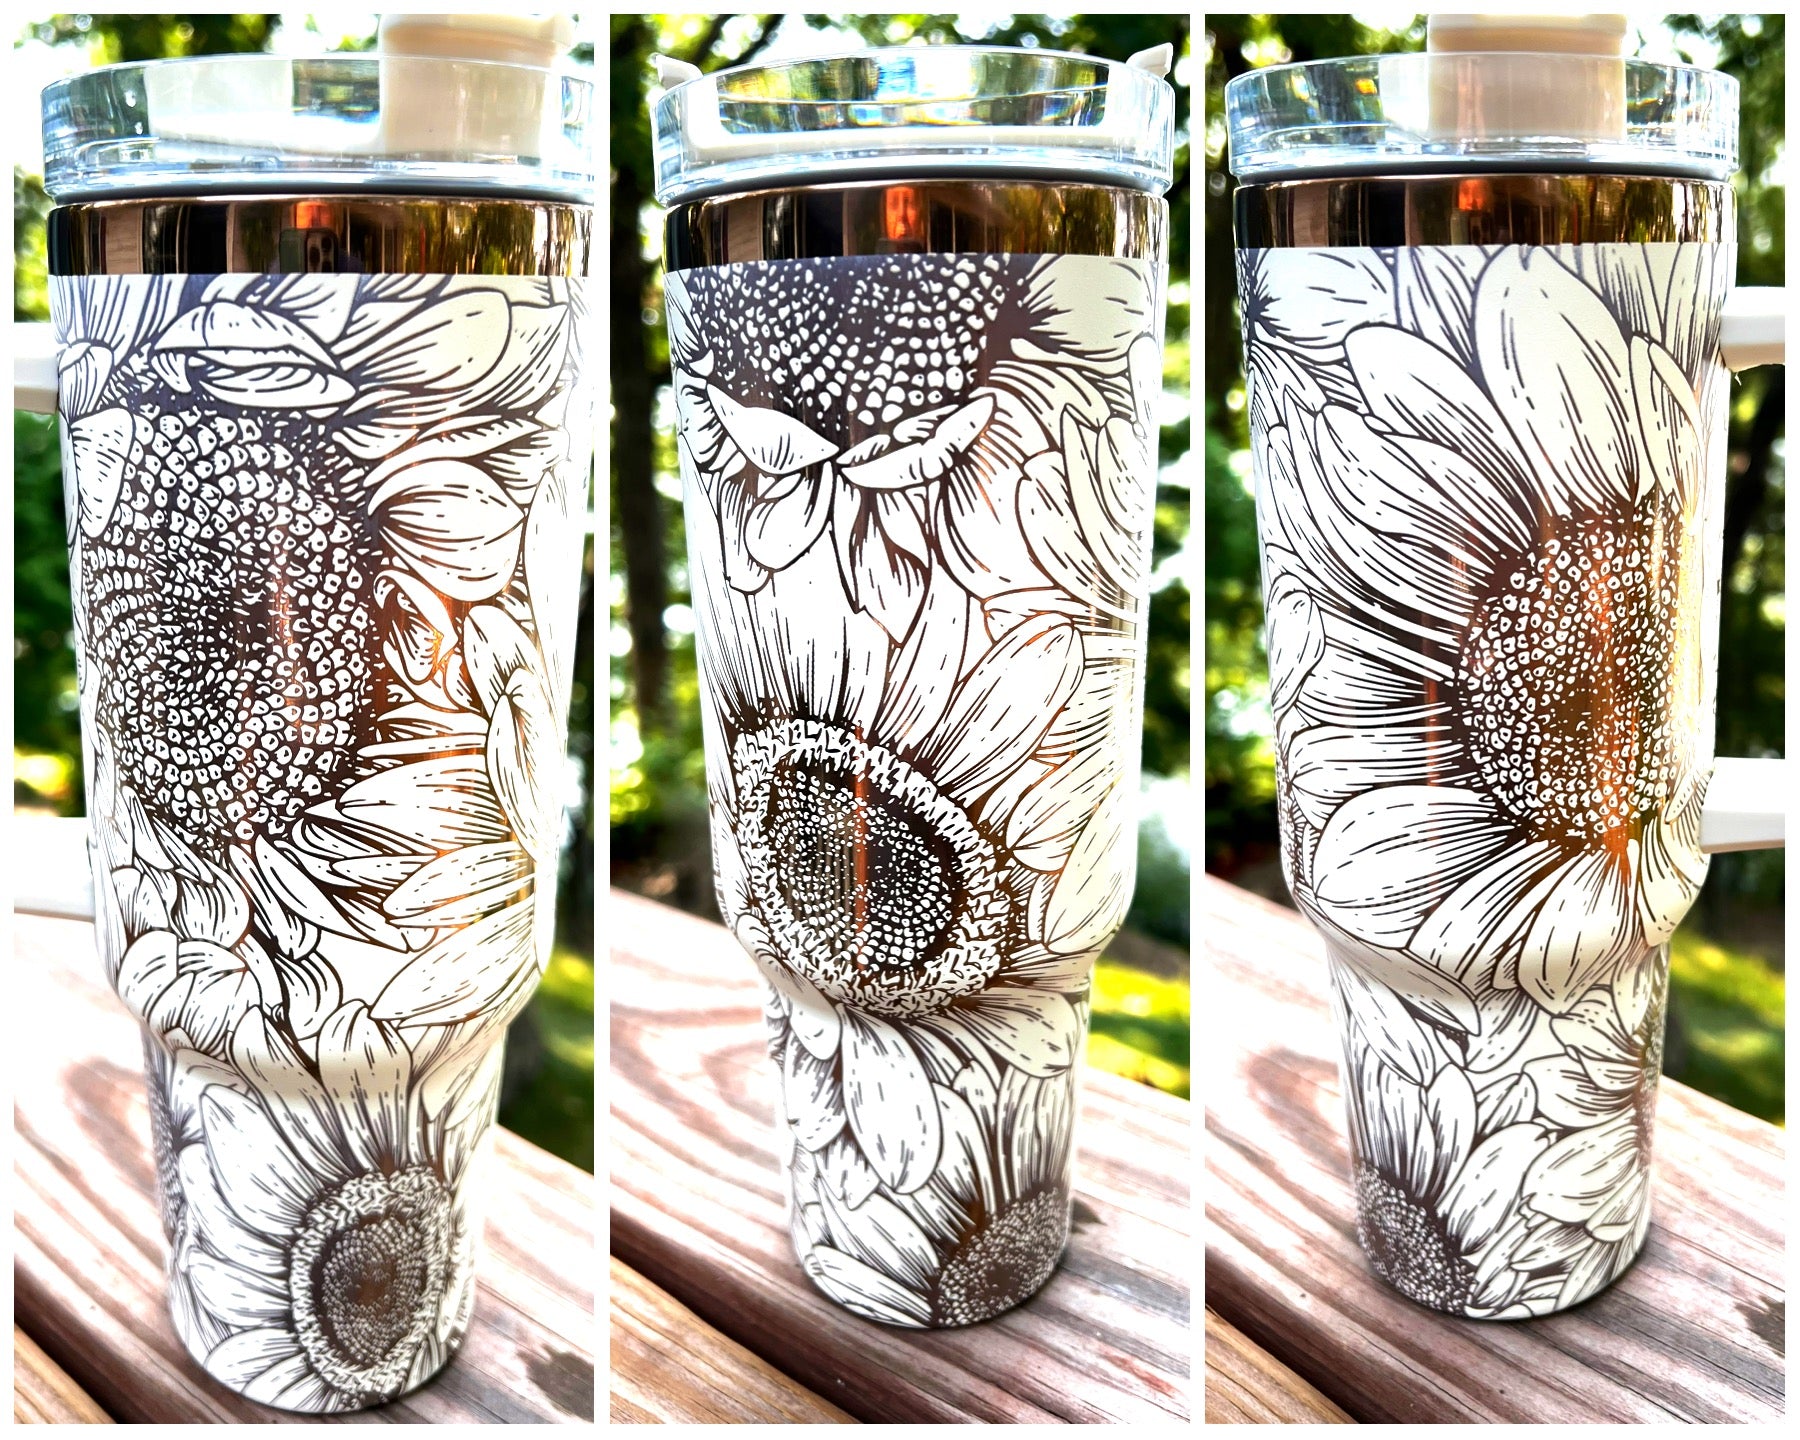 This gorgeous 40 oz. Copper Tumbler is even prettier in person. It has a stainless steel inside with a copper outside and cream powder coating and then engraved to reveal the beautiful copper underneath.